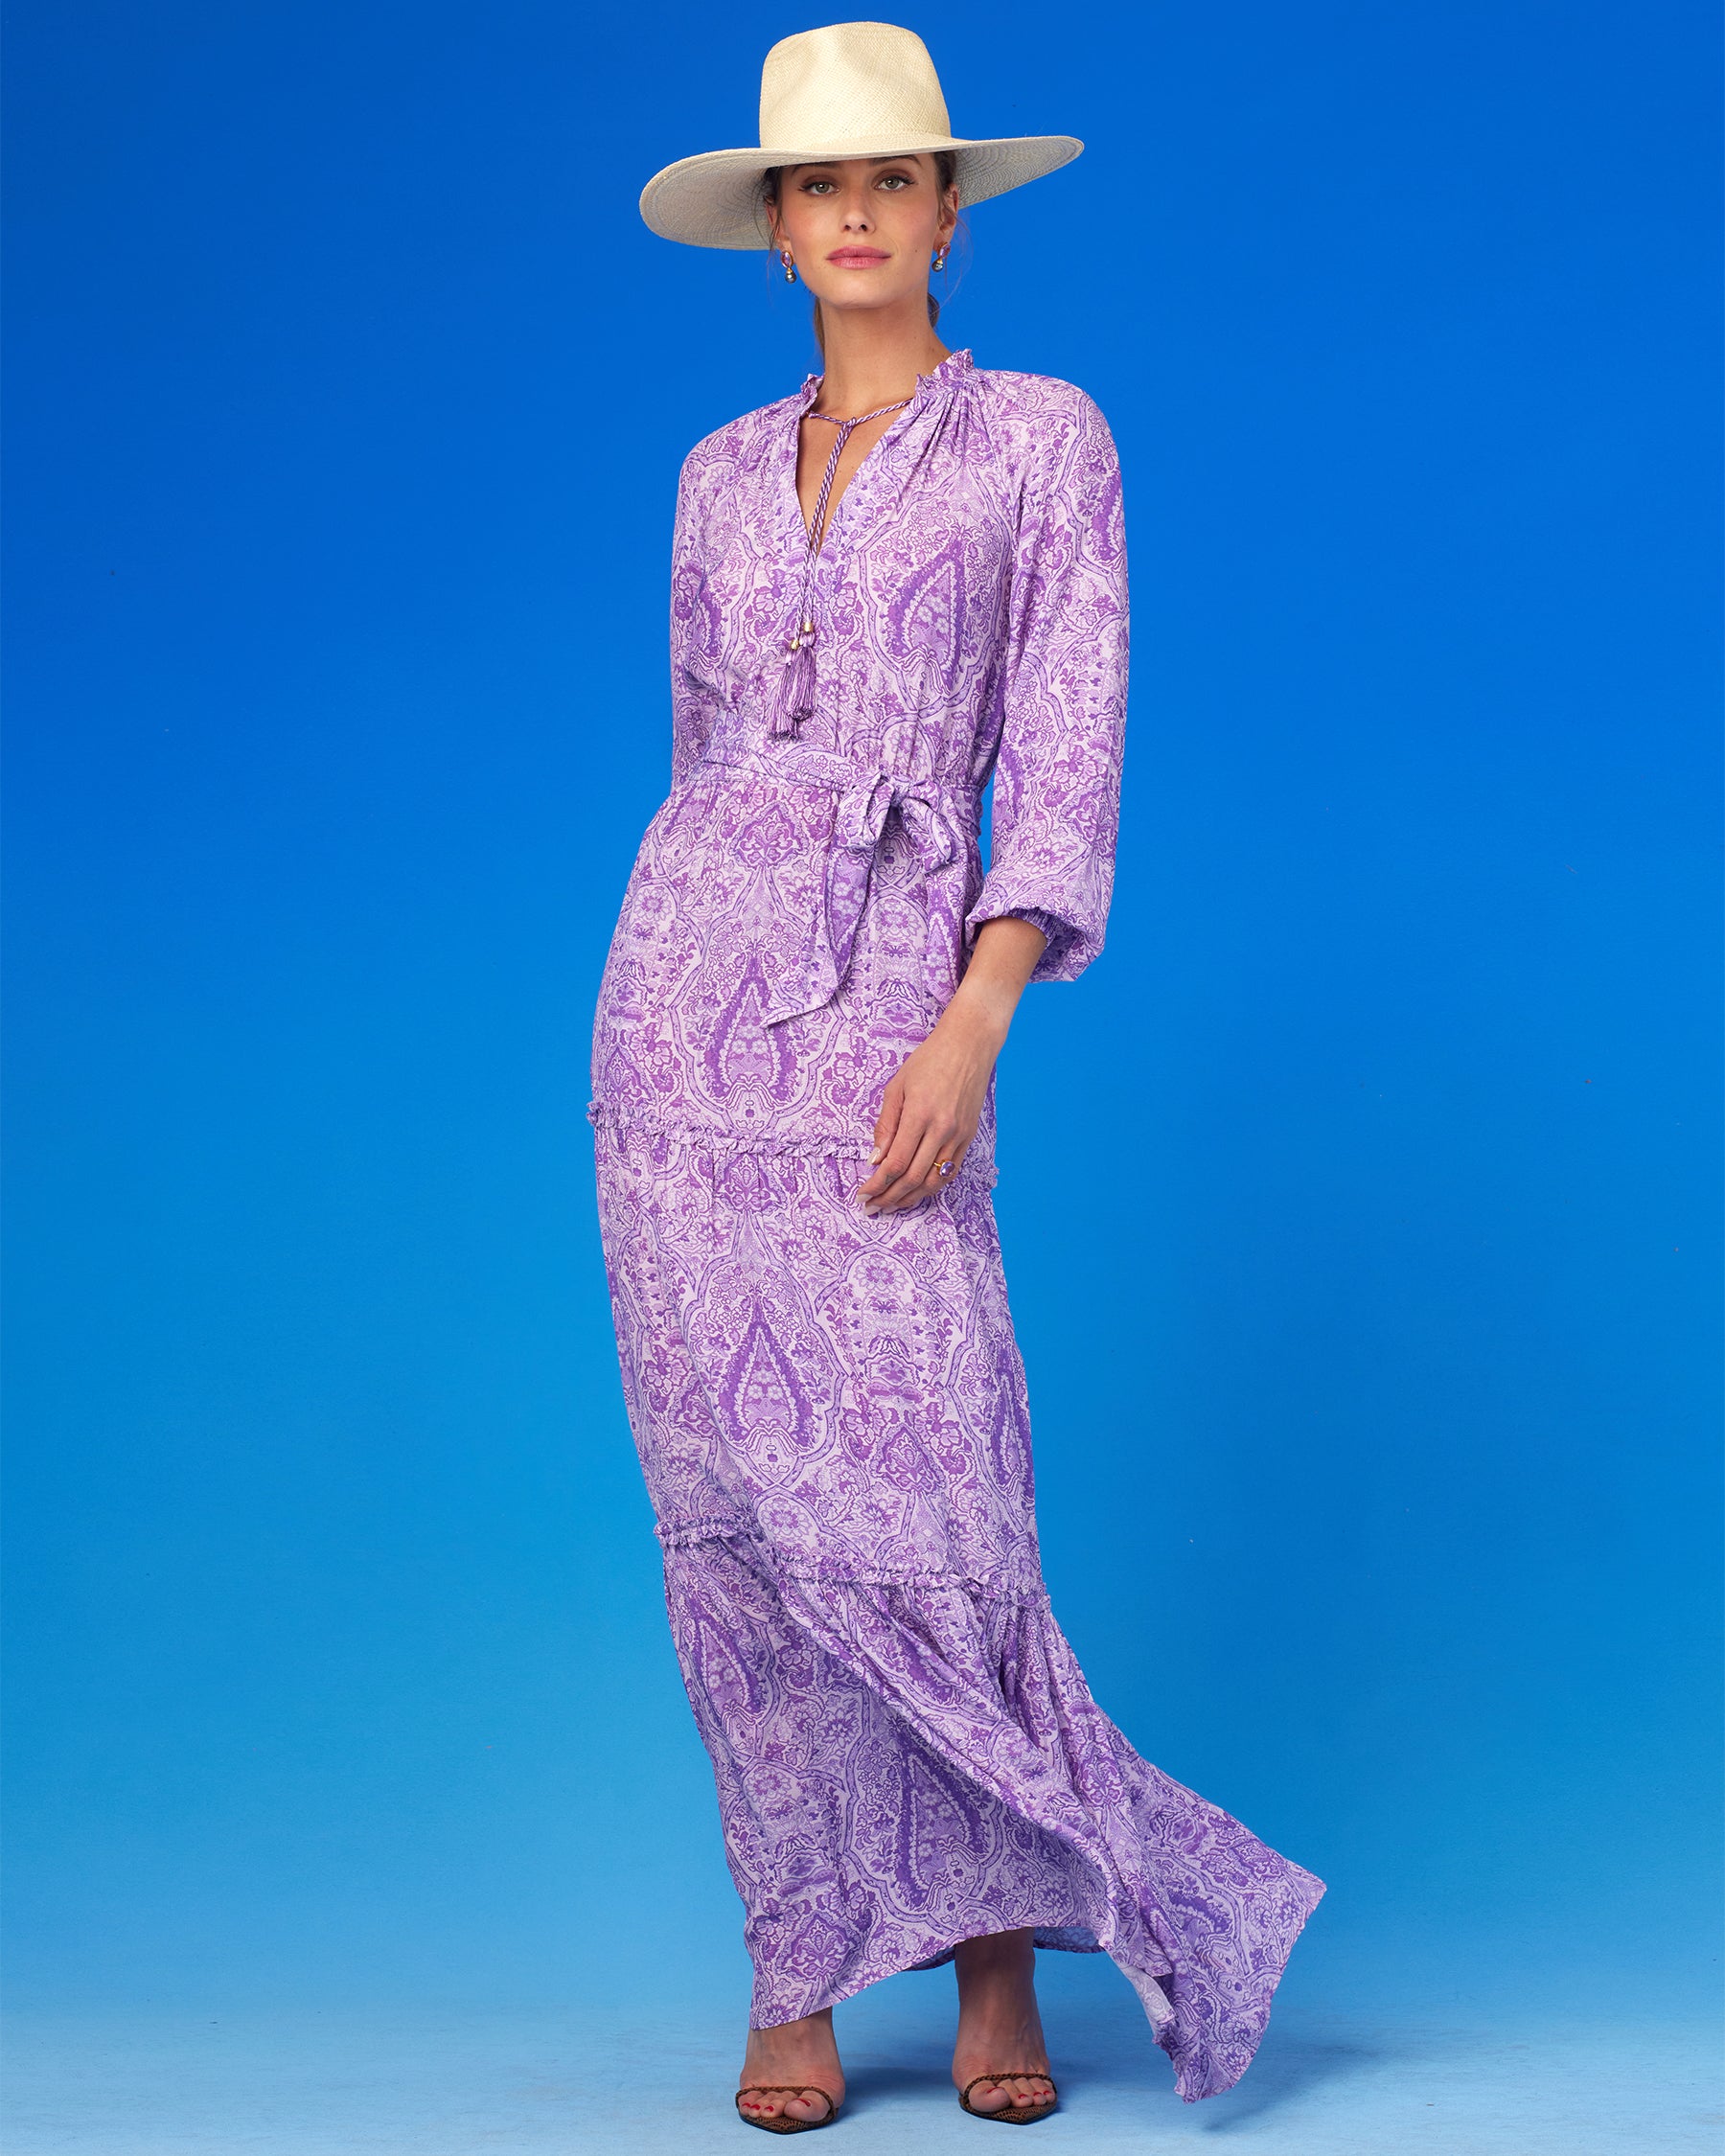 Violette Ruffle Maxi Dress in Lavender Paisley-Front full view with straw hat